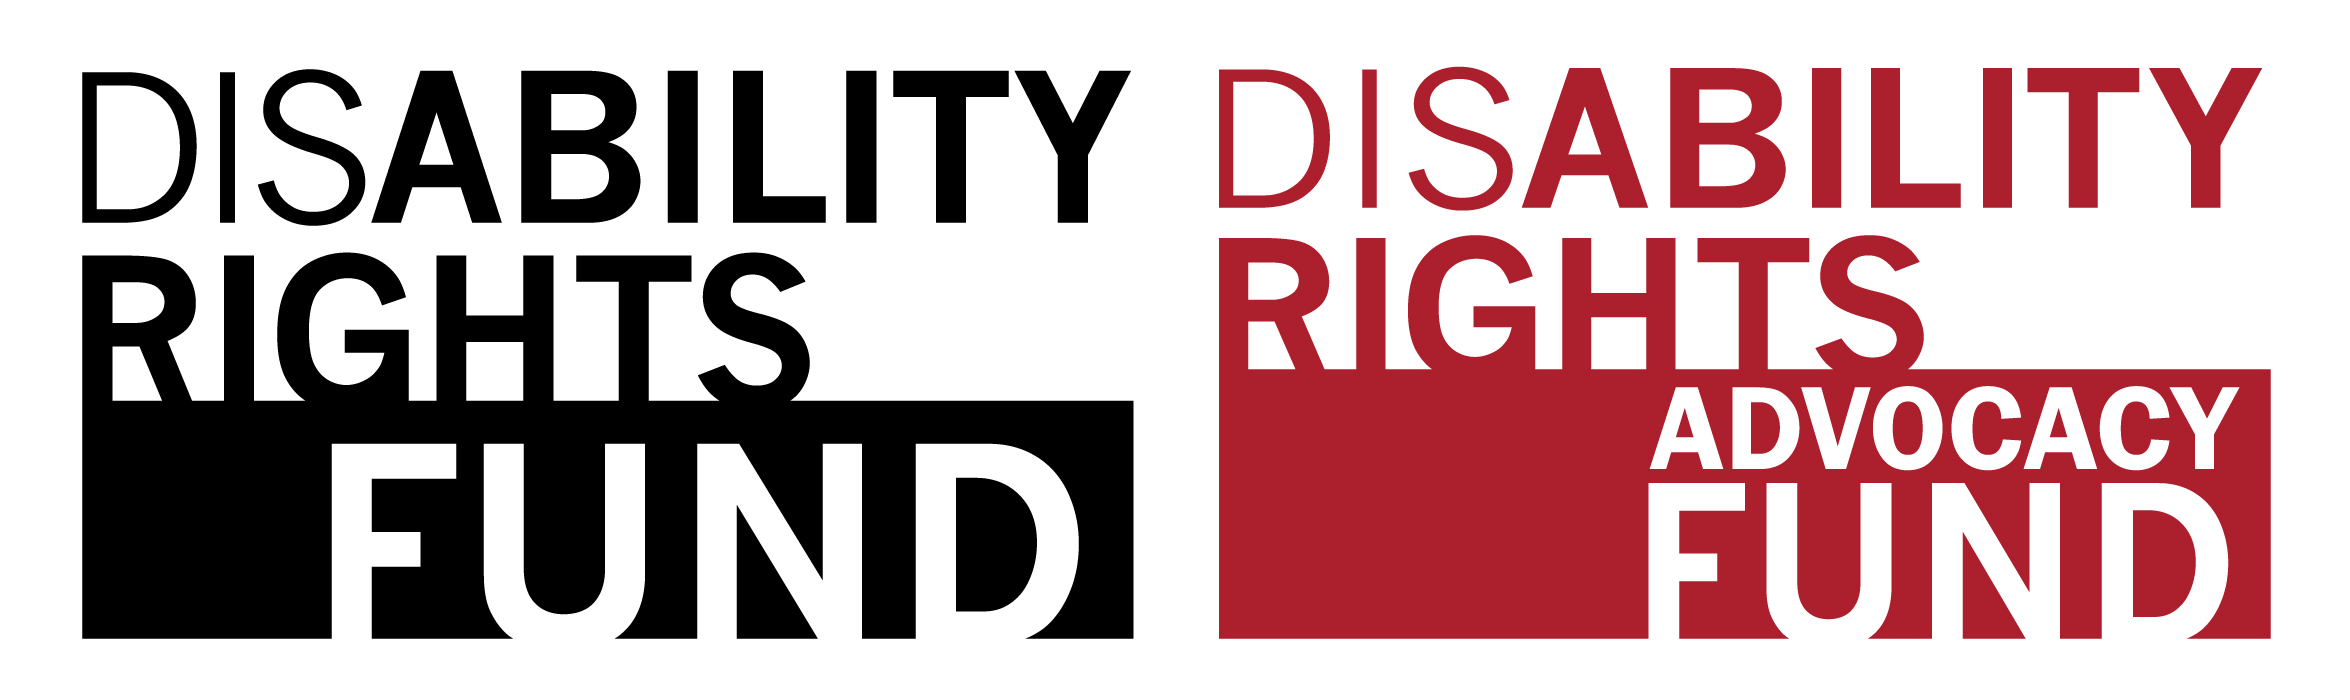 Disability Rights Fund and Disability Rights Advocacy fund logos